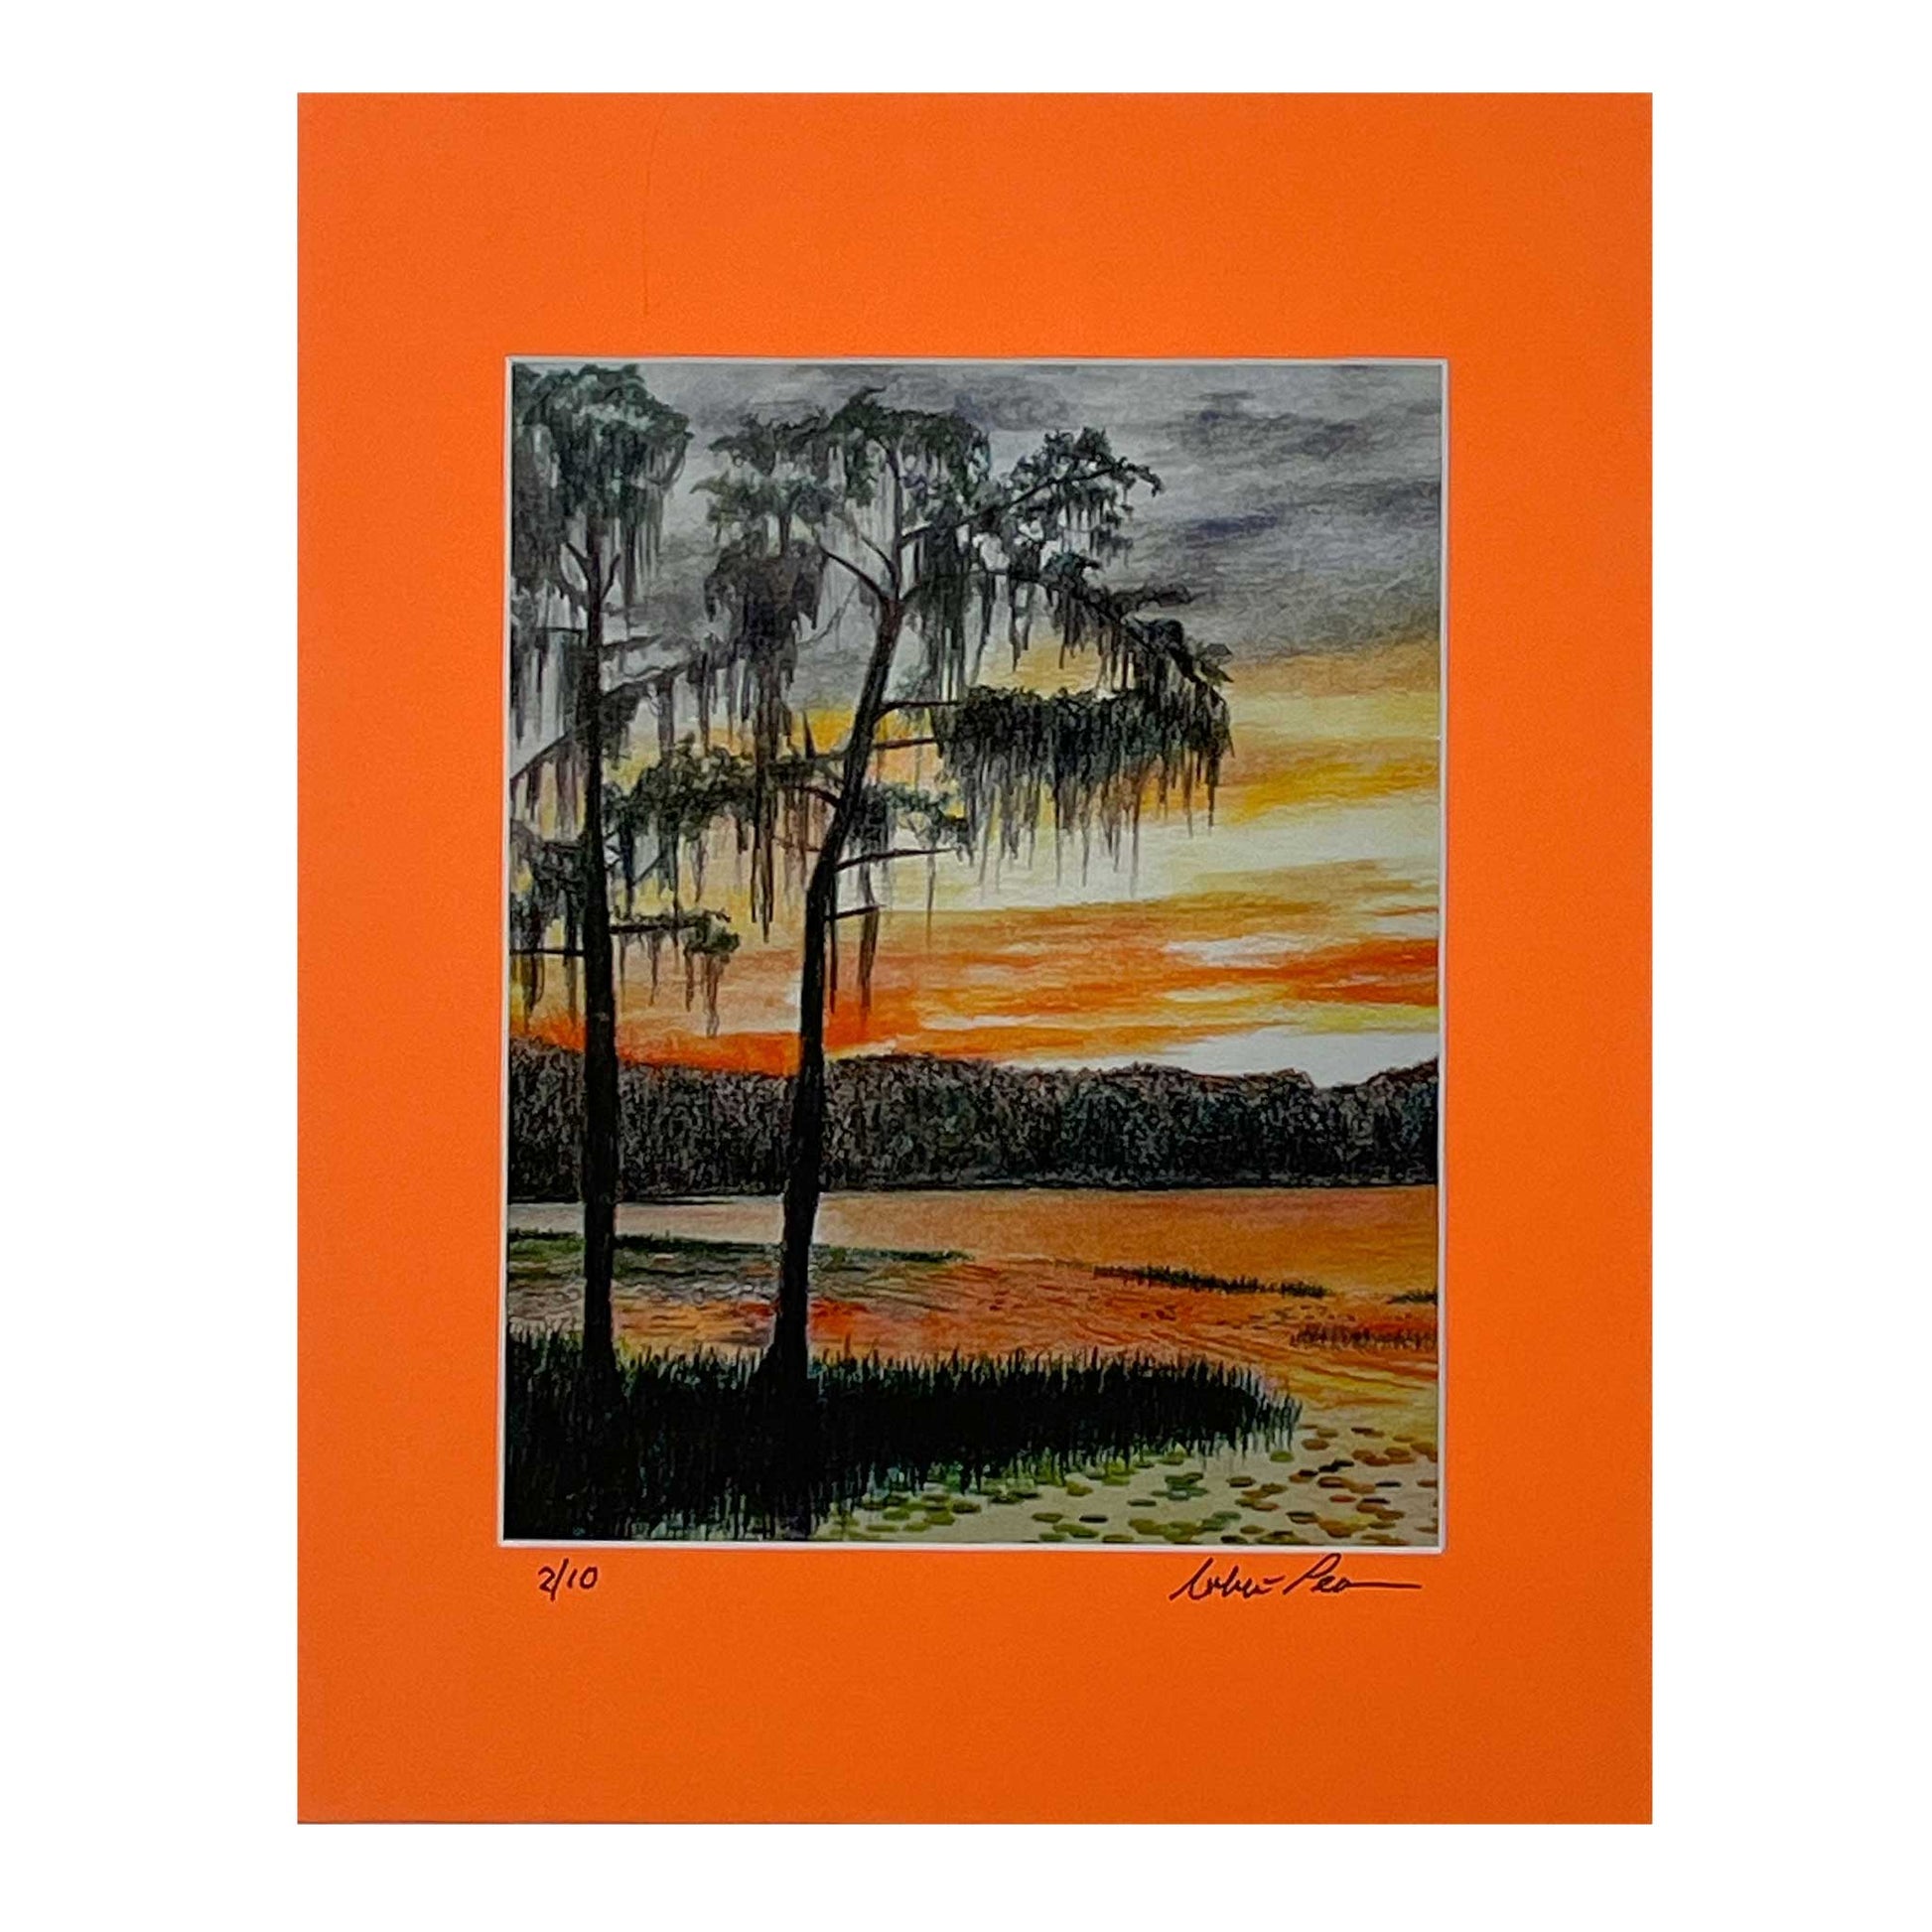 RWP Homage to Highwaymen Sunset Matted Print by Artist Robert Pearson, Florida's Lake Louisa State Park, Orange sky reflecting off the water, Beautiful Sunset of Lake Dixie, Two Moss Covered Trees in the Orange Glow of Sunset, 11 x 14" matted Print